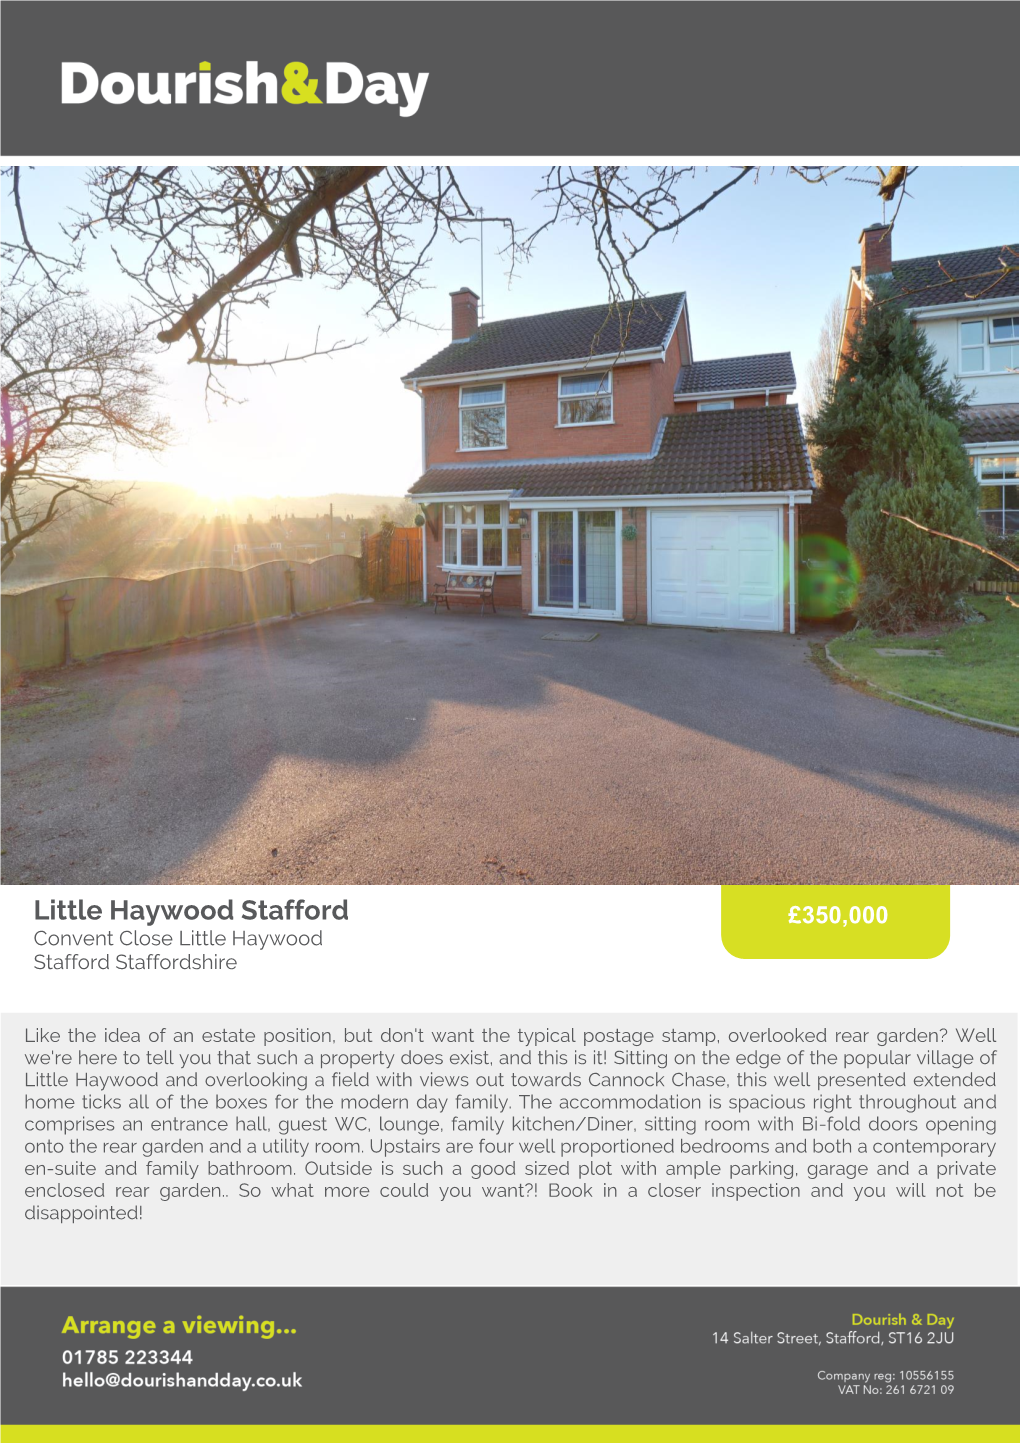 Little Haywood Stafford £350,000 Convent Close Little Haywood Stafford Staffordshire